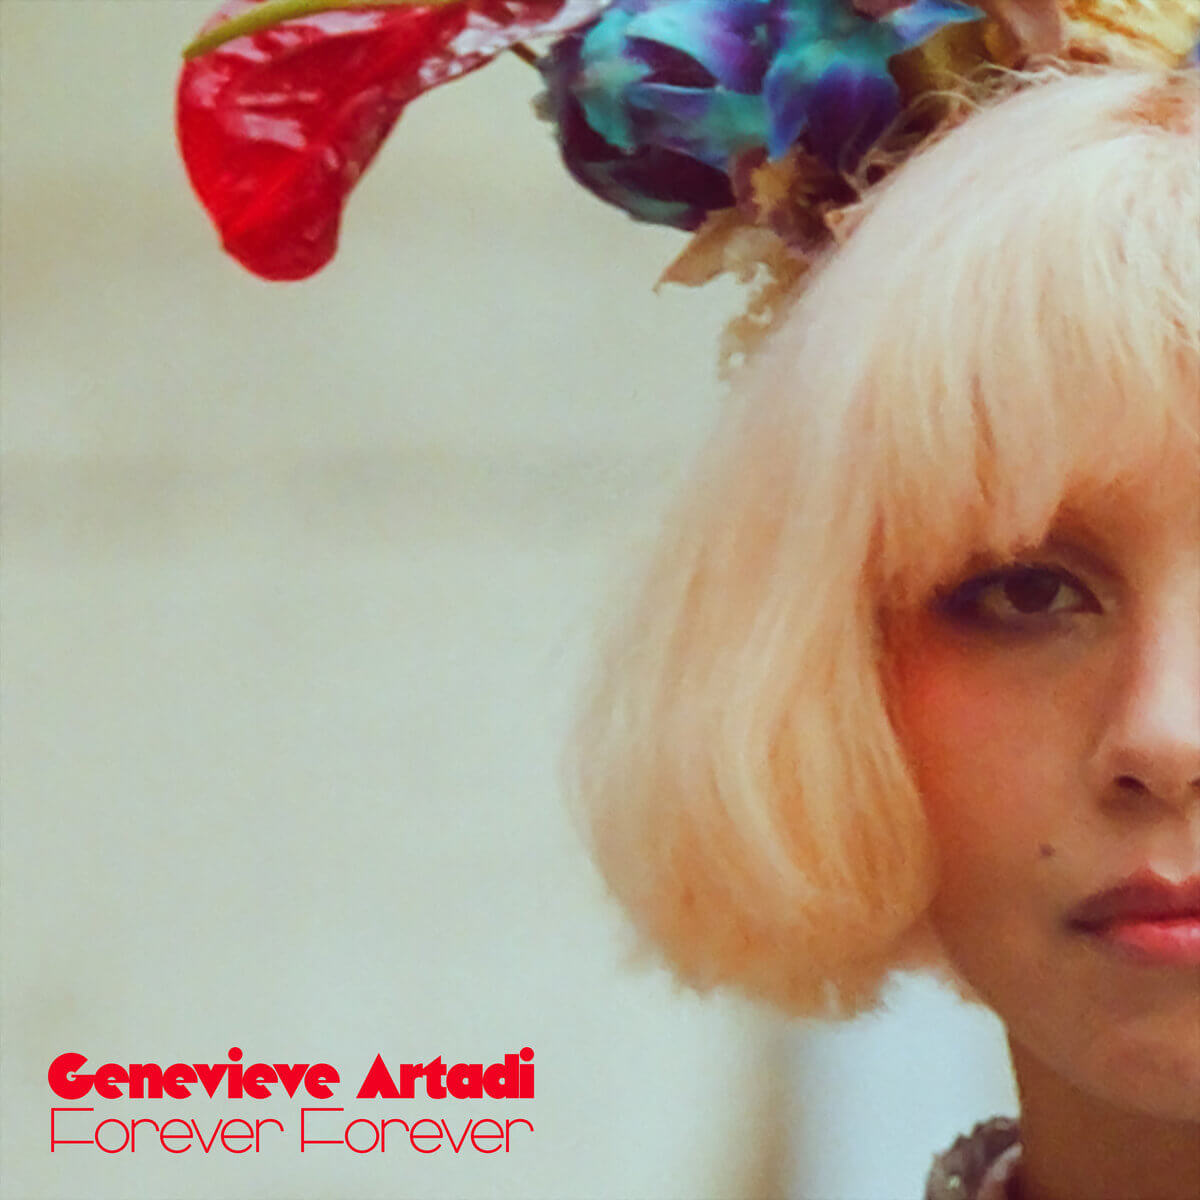 Forever Forever by Genevieve Artadi Album Review by Greg Walker for Northern Transmissions